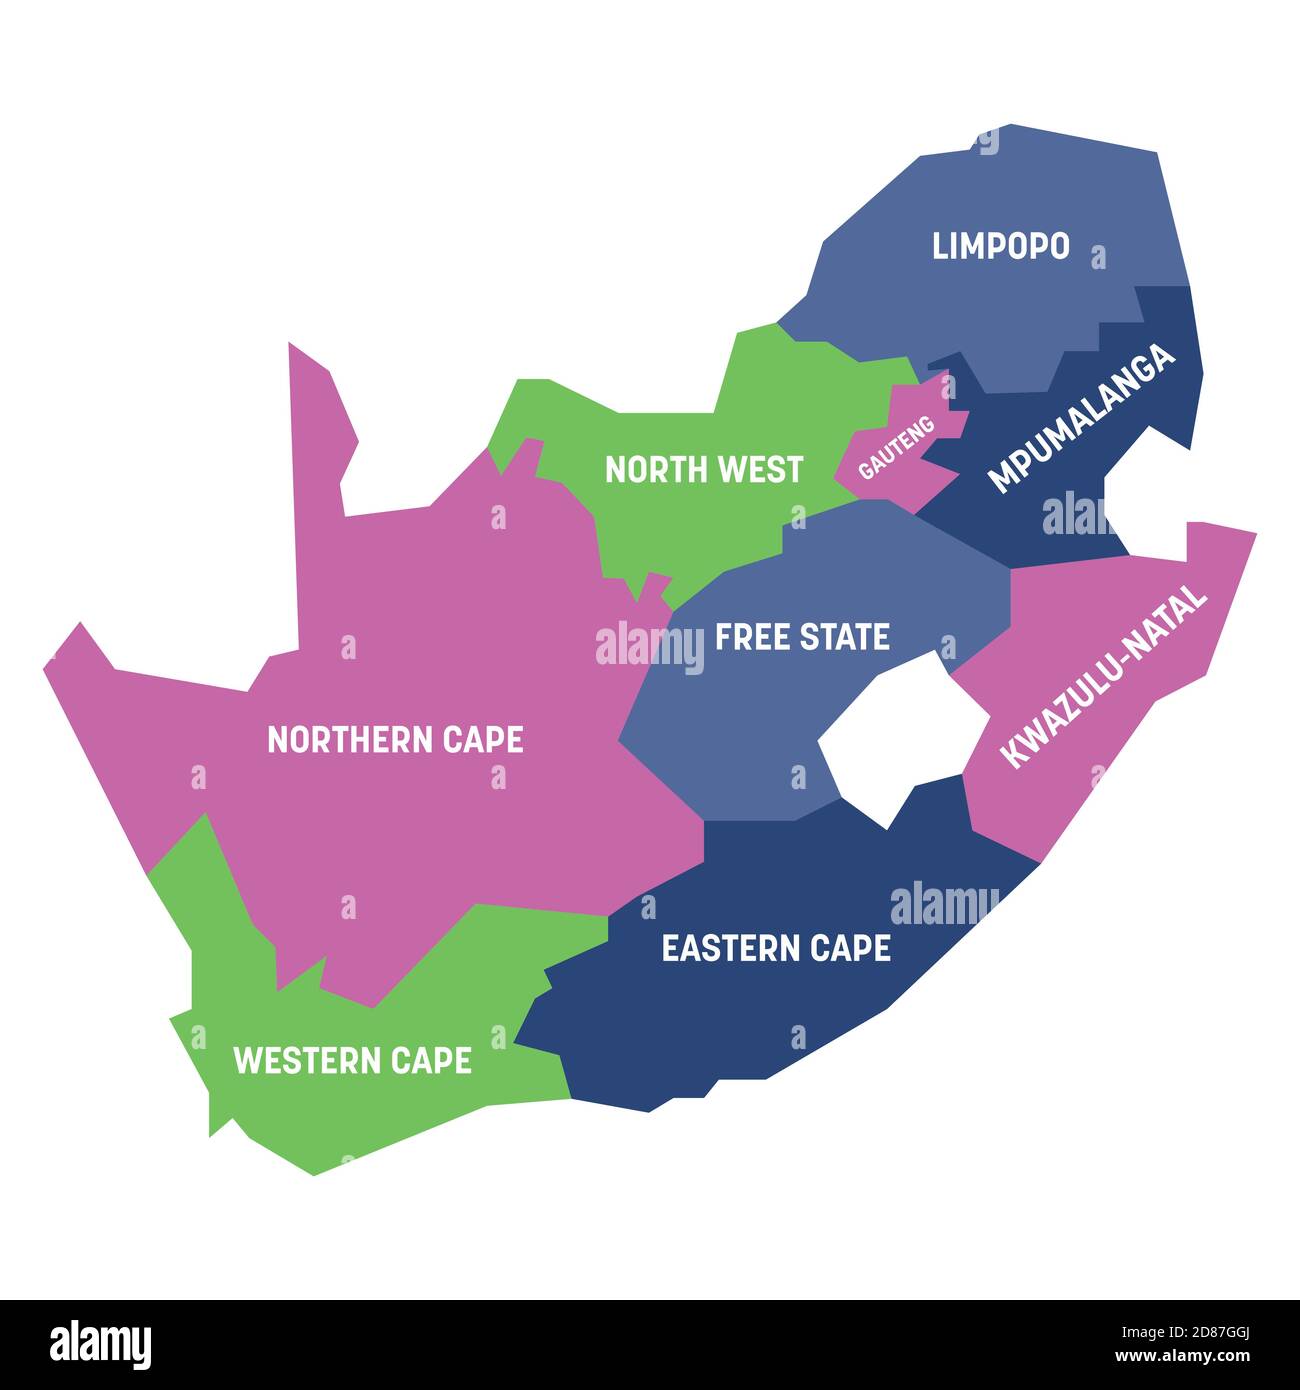 Colorful political map of South Africa, RSA. Administrative divisions - provinces. Simple flat vector map with labels. Stock Vector